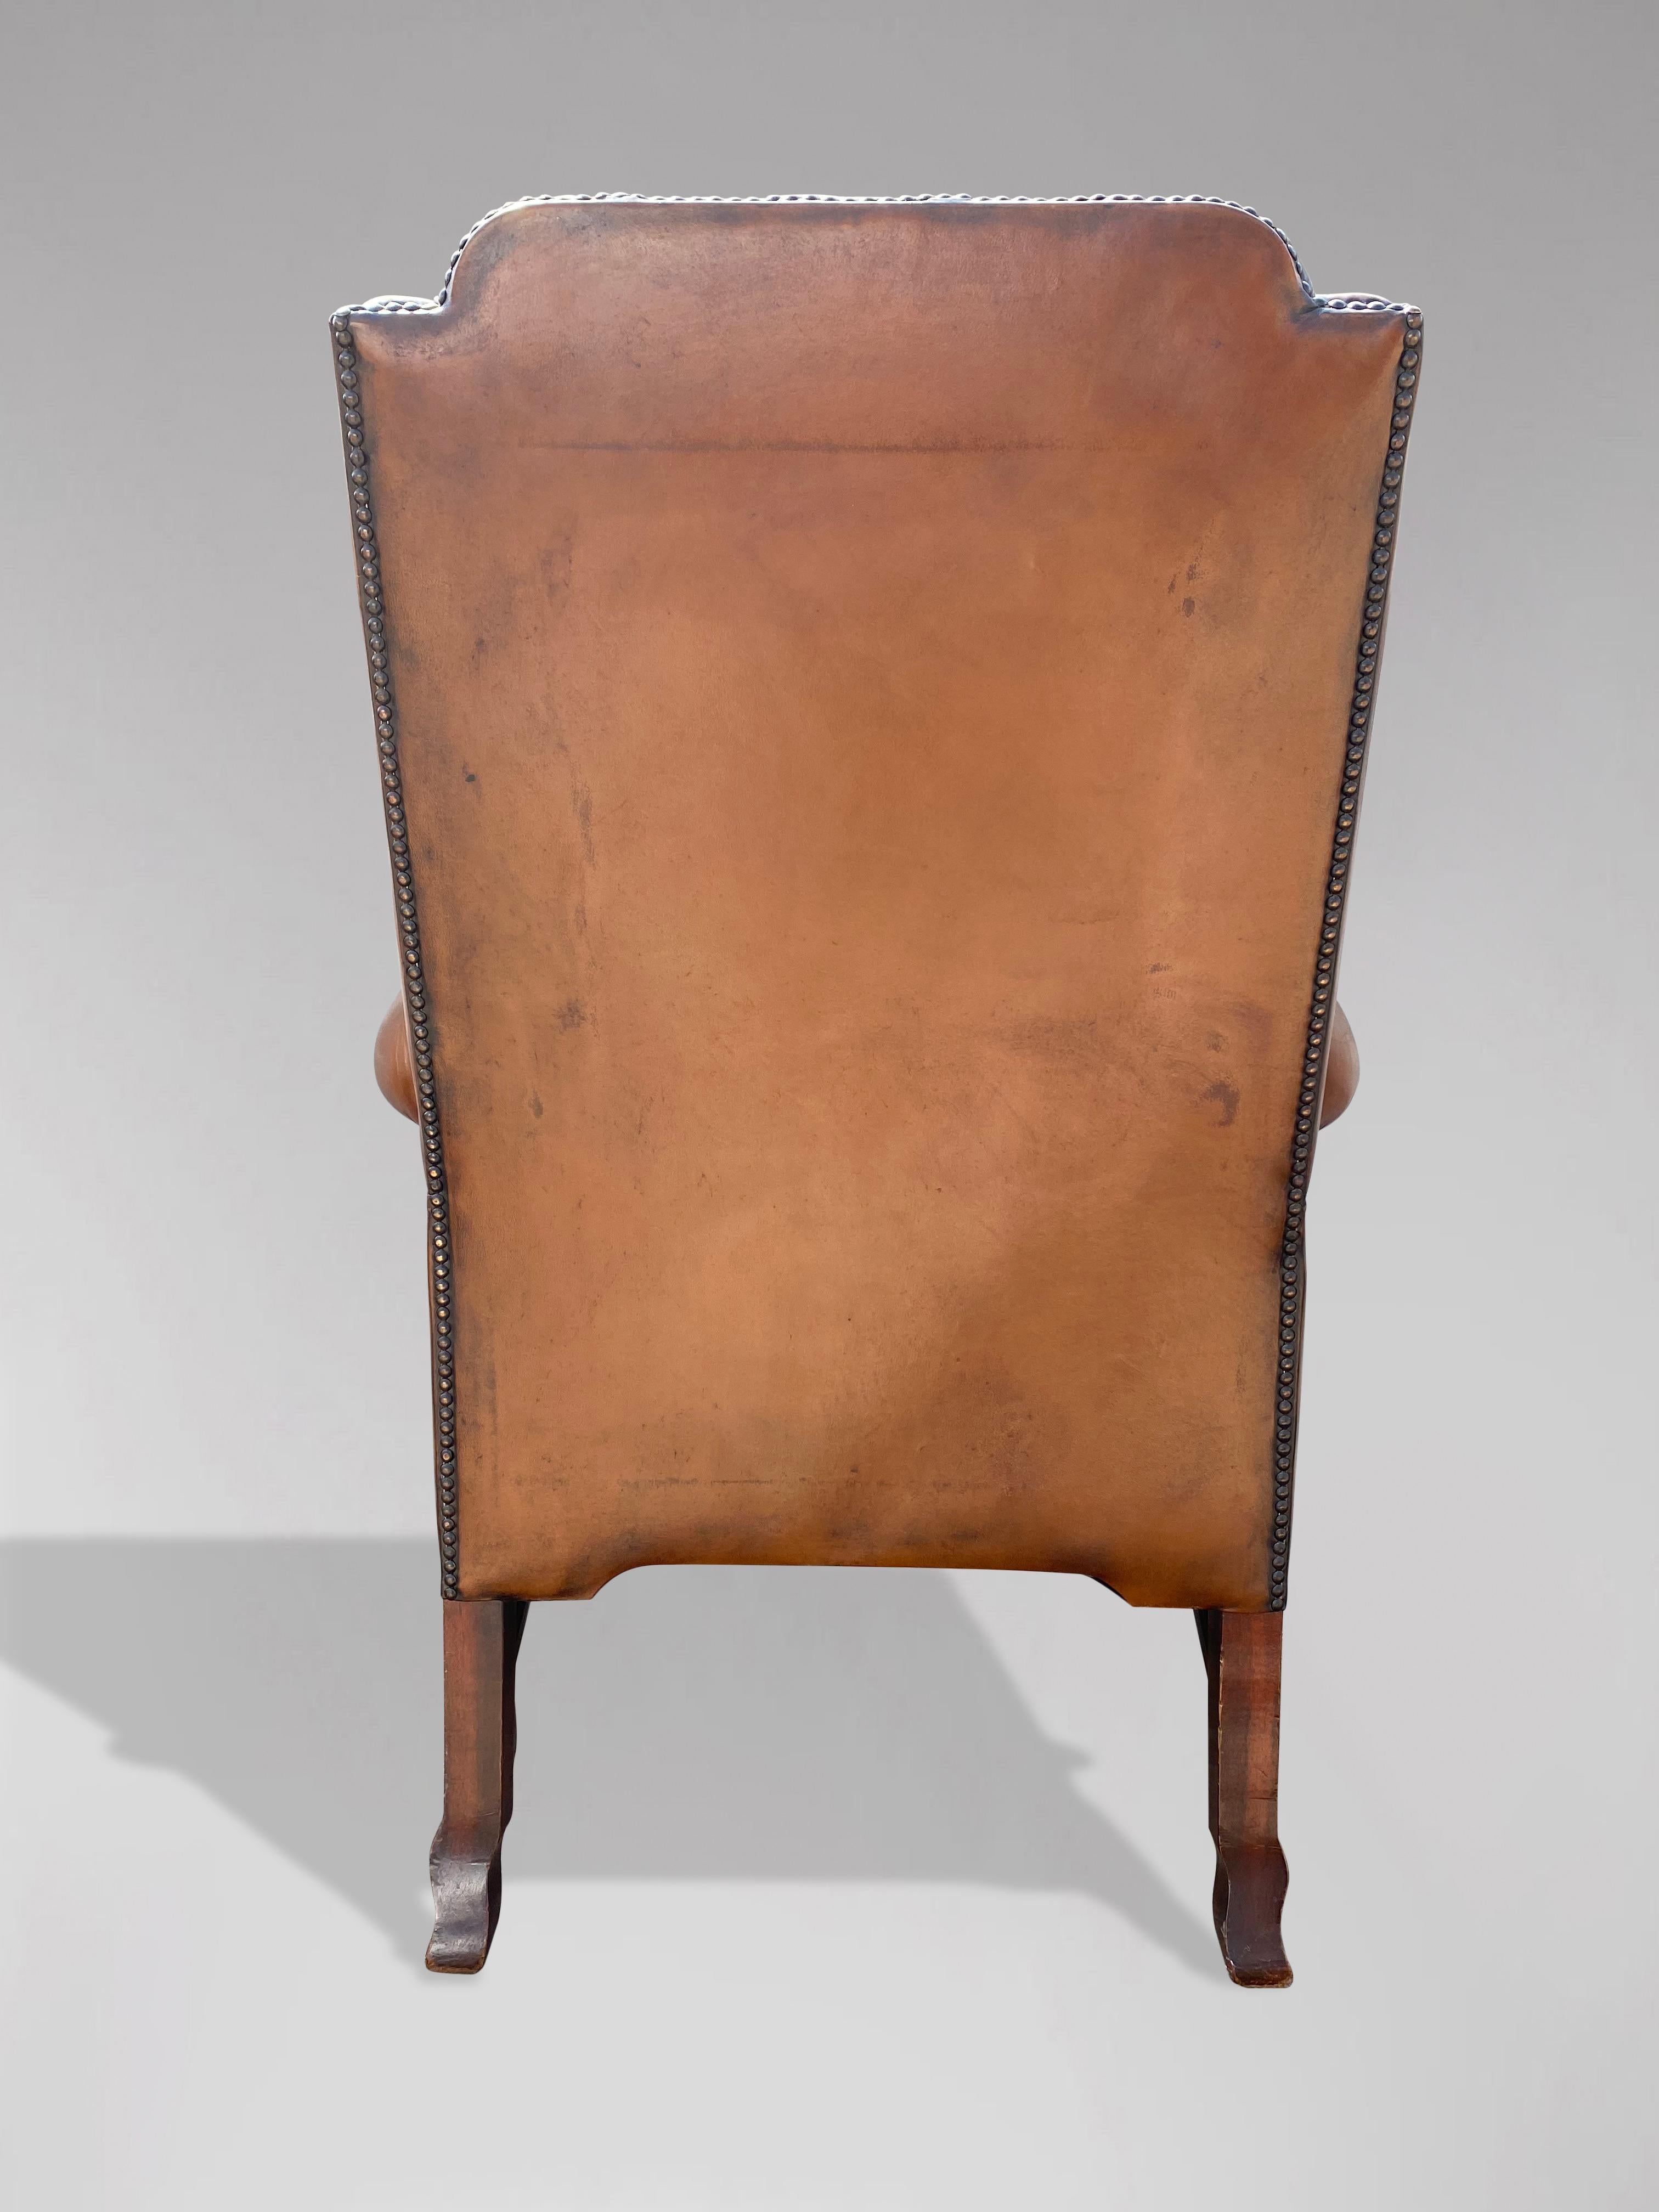 20th Century Queen Anne Style Brown Leather Wing Armchair